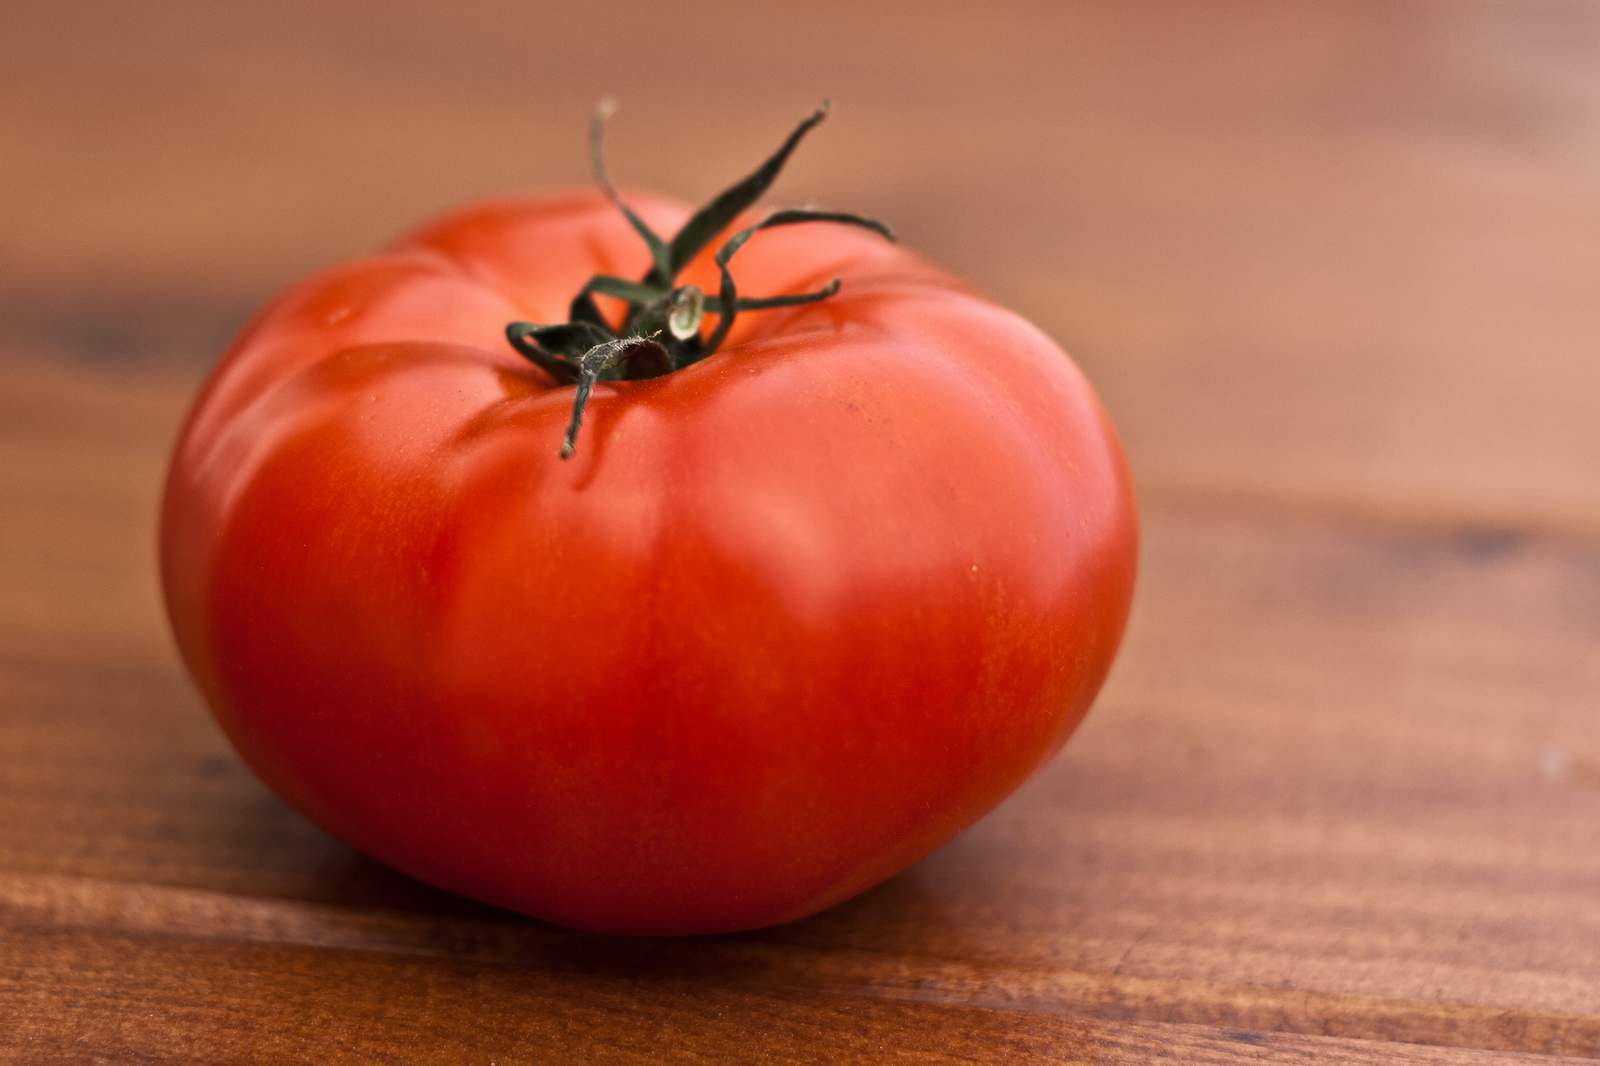 This simple trick will make even the most average of tomatoes taste delicious